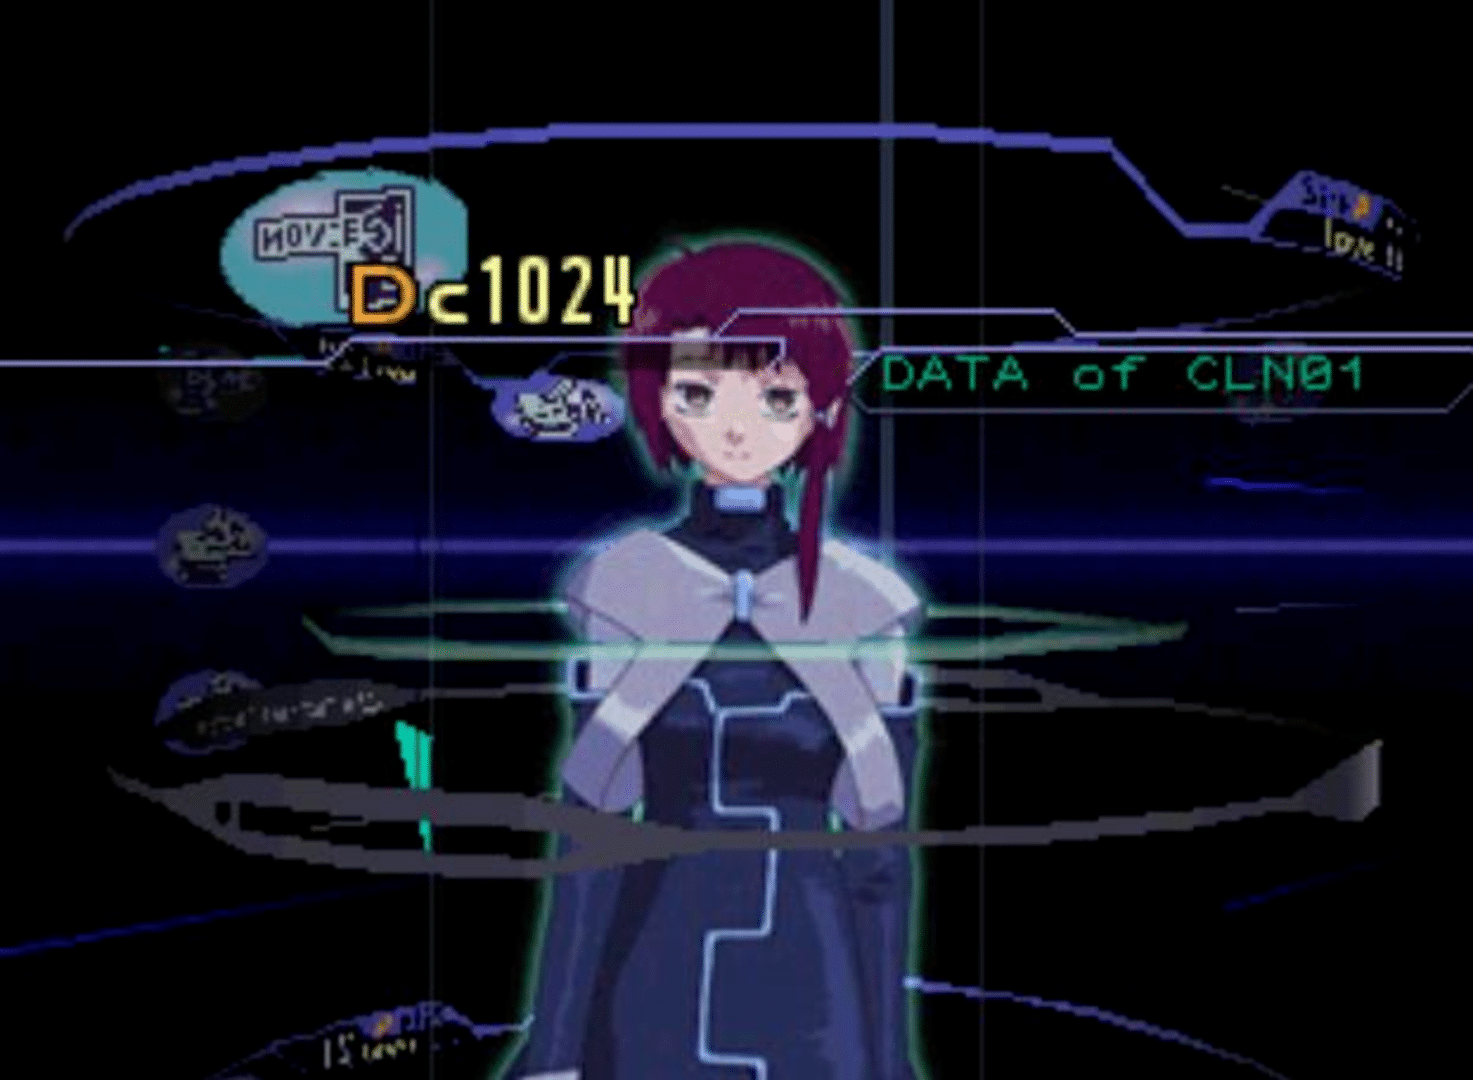 serial experiments lain subbed